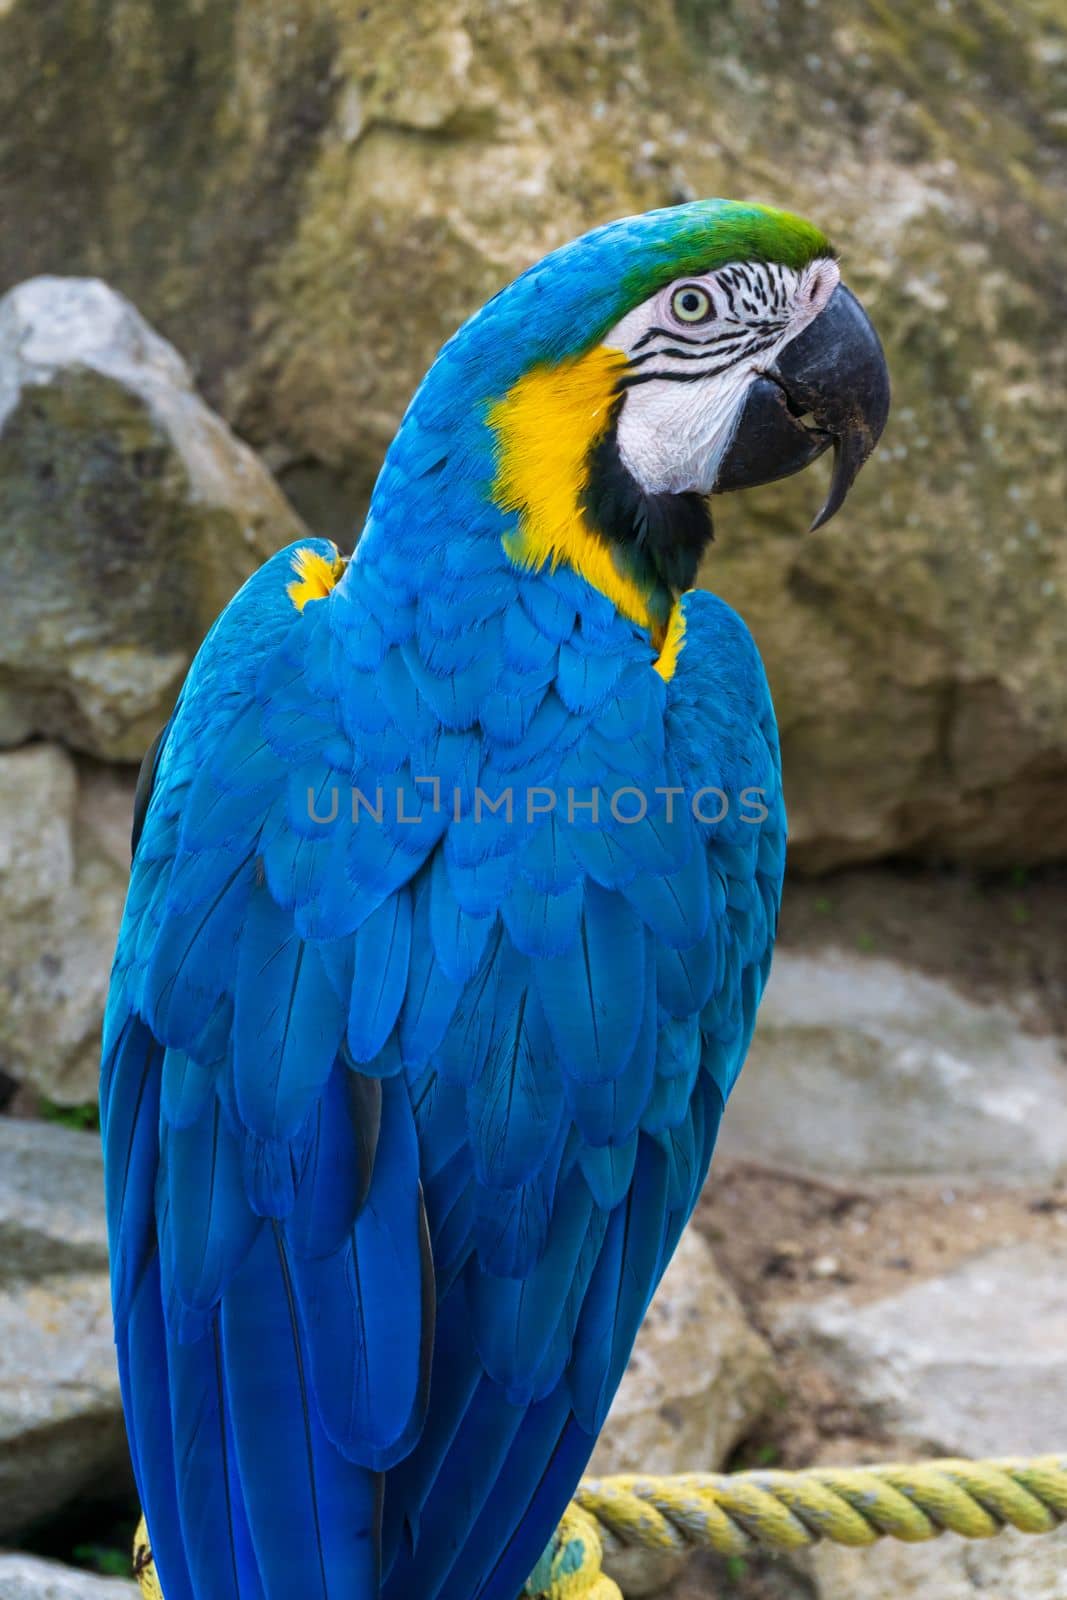 Giant blue macaw parrot in the park close up